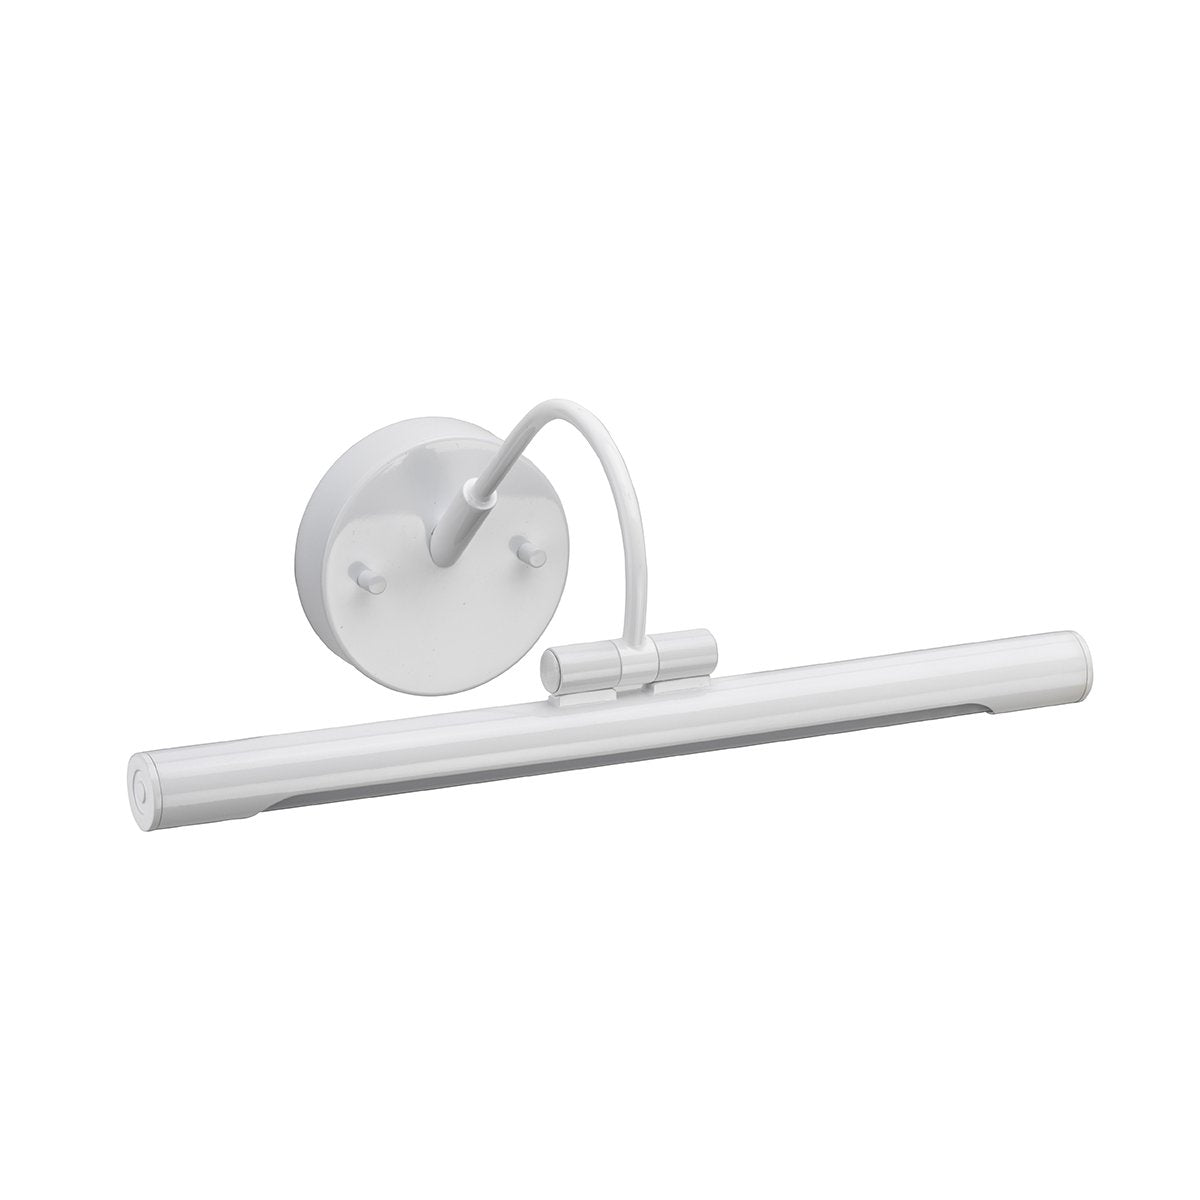 Cubitt Small Picture Light In White - ID 8352